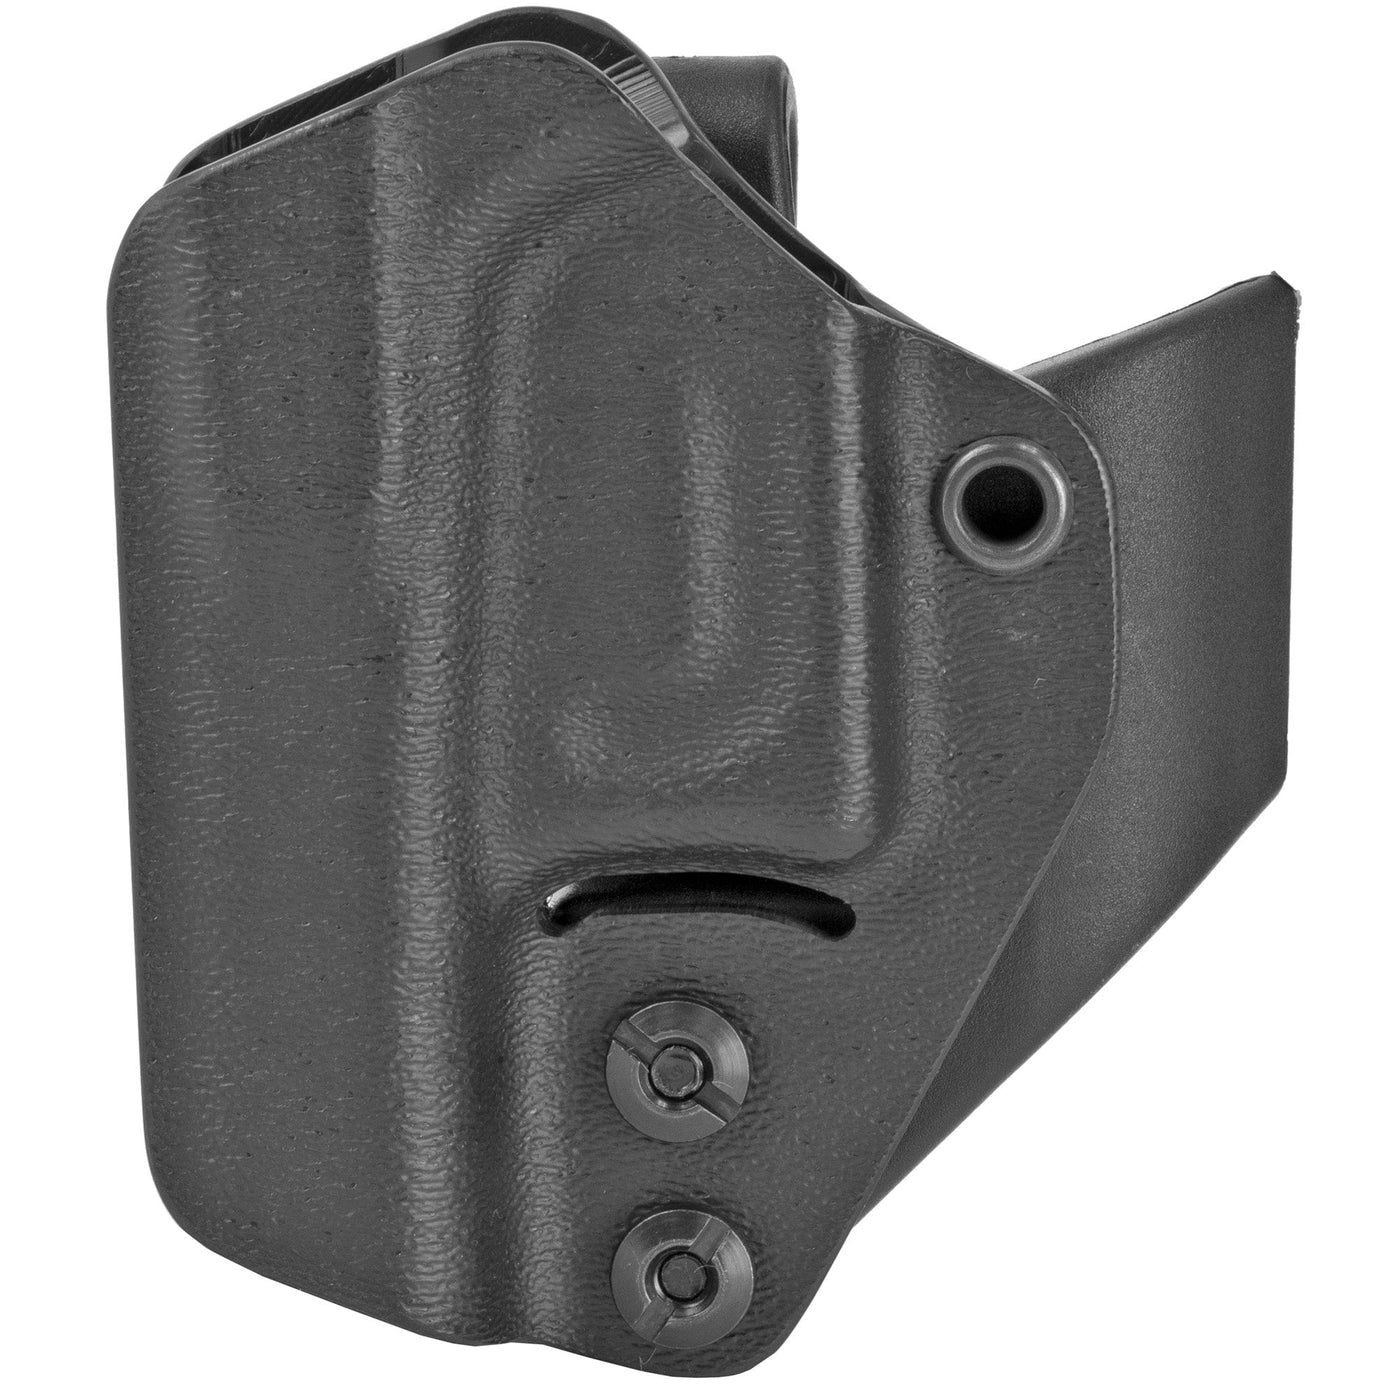 Mission First Tactical Mft Minimalist Hlstr For Glk 17/19 Firearm Accessories